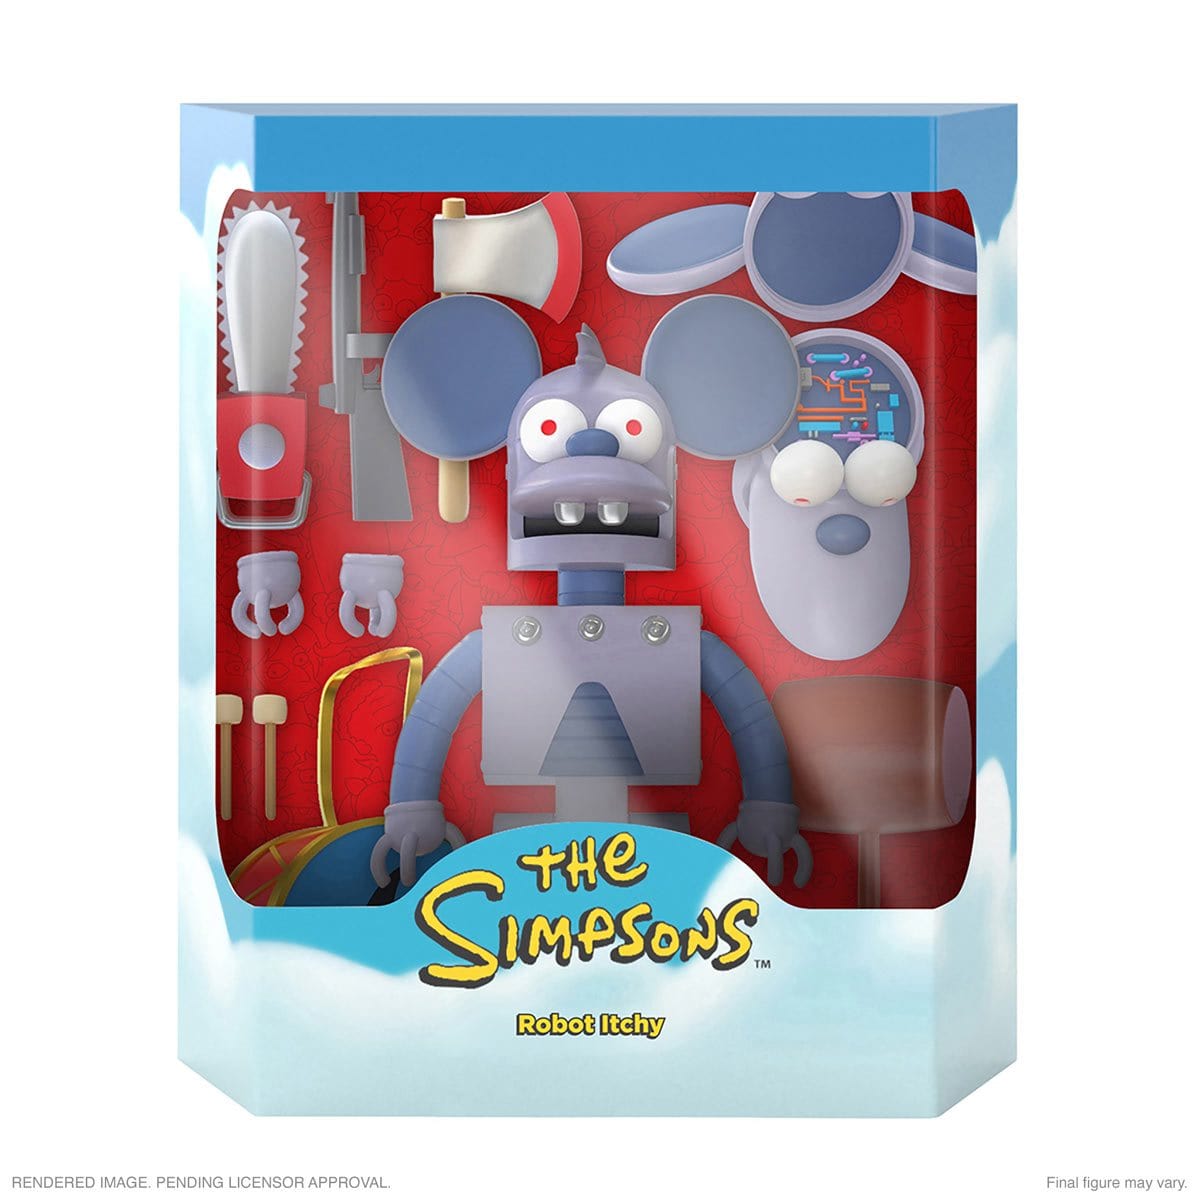 The Simpsons Robot Itchy Super7 Ultimates 7-Inch Action Figure Pop-O-Loco